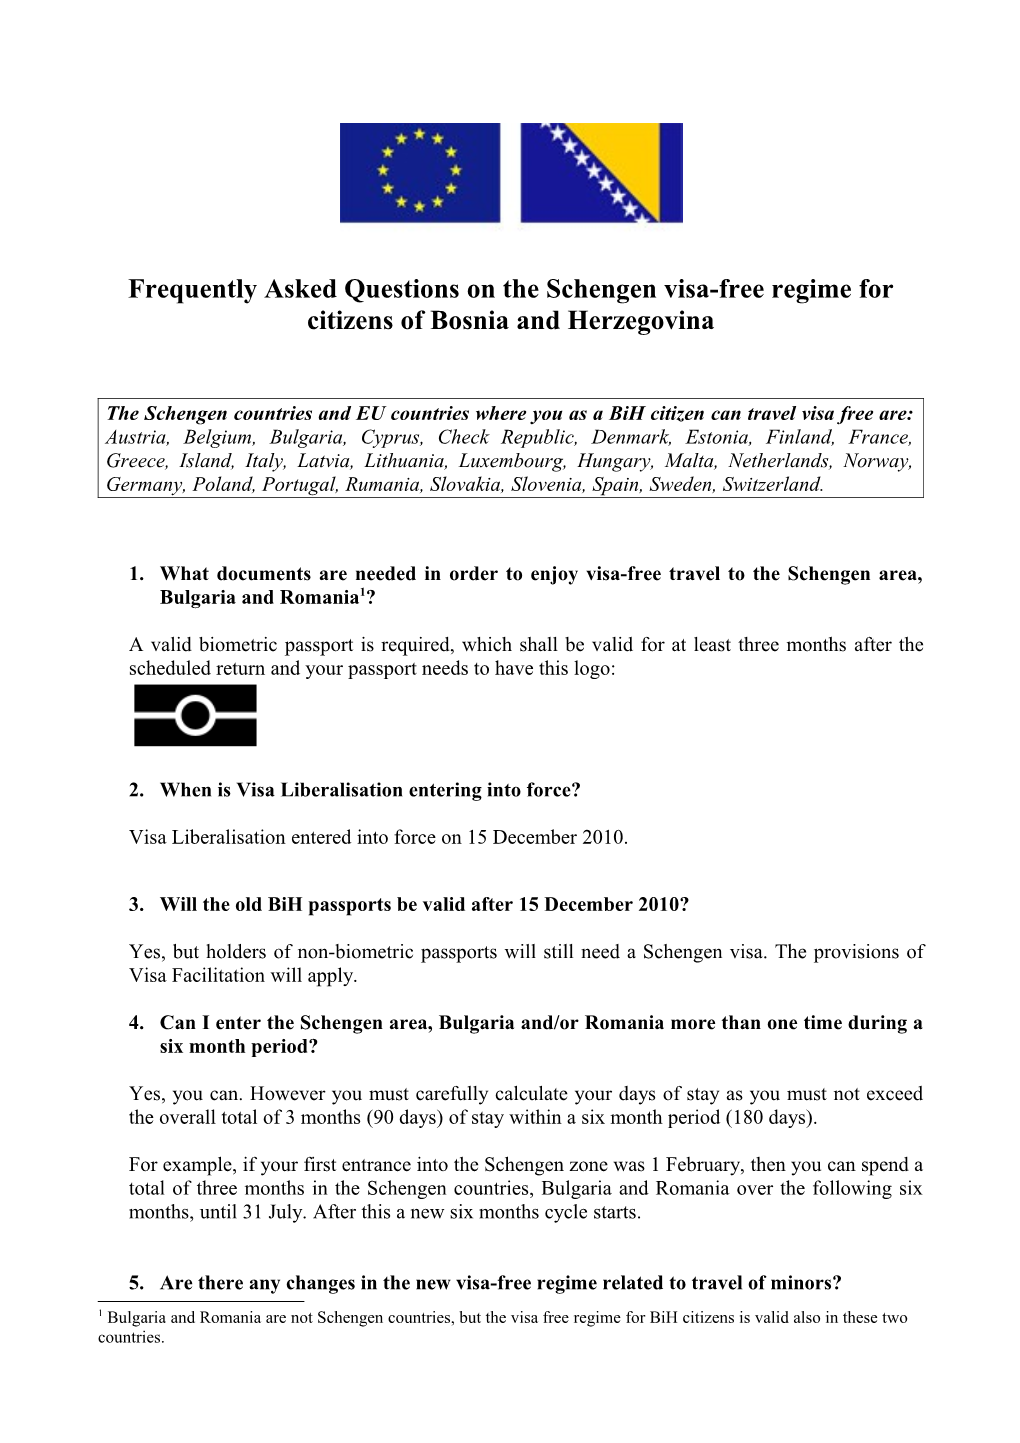 Frequent Asked Question on the Schengen Visa-Free Regime for Citizens of Bosnia and Herzegovina